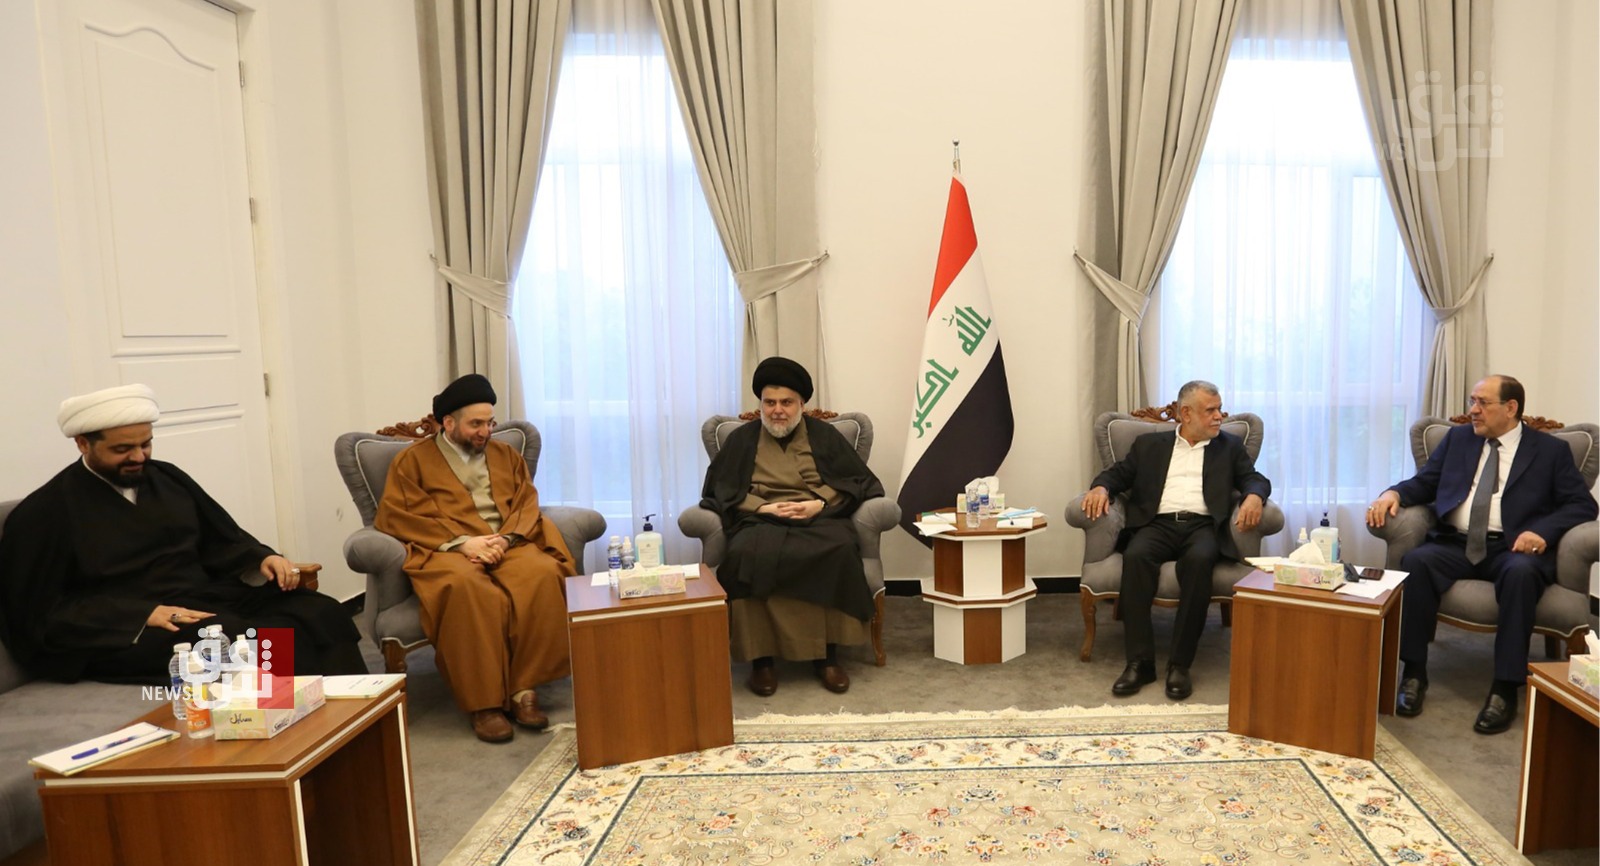 Attended by al-Sadr and al-Maliki, a meeting of Iraq's top Shiite leader in Baghdad 